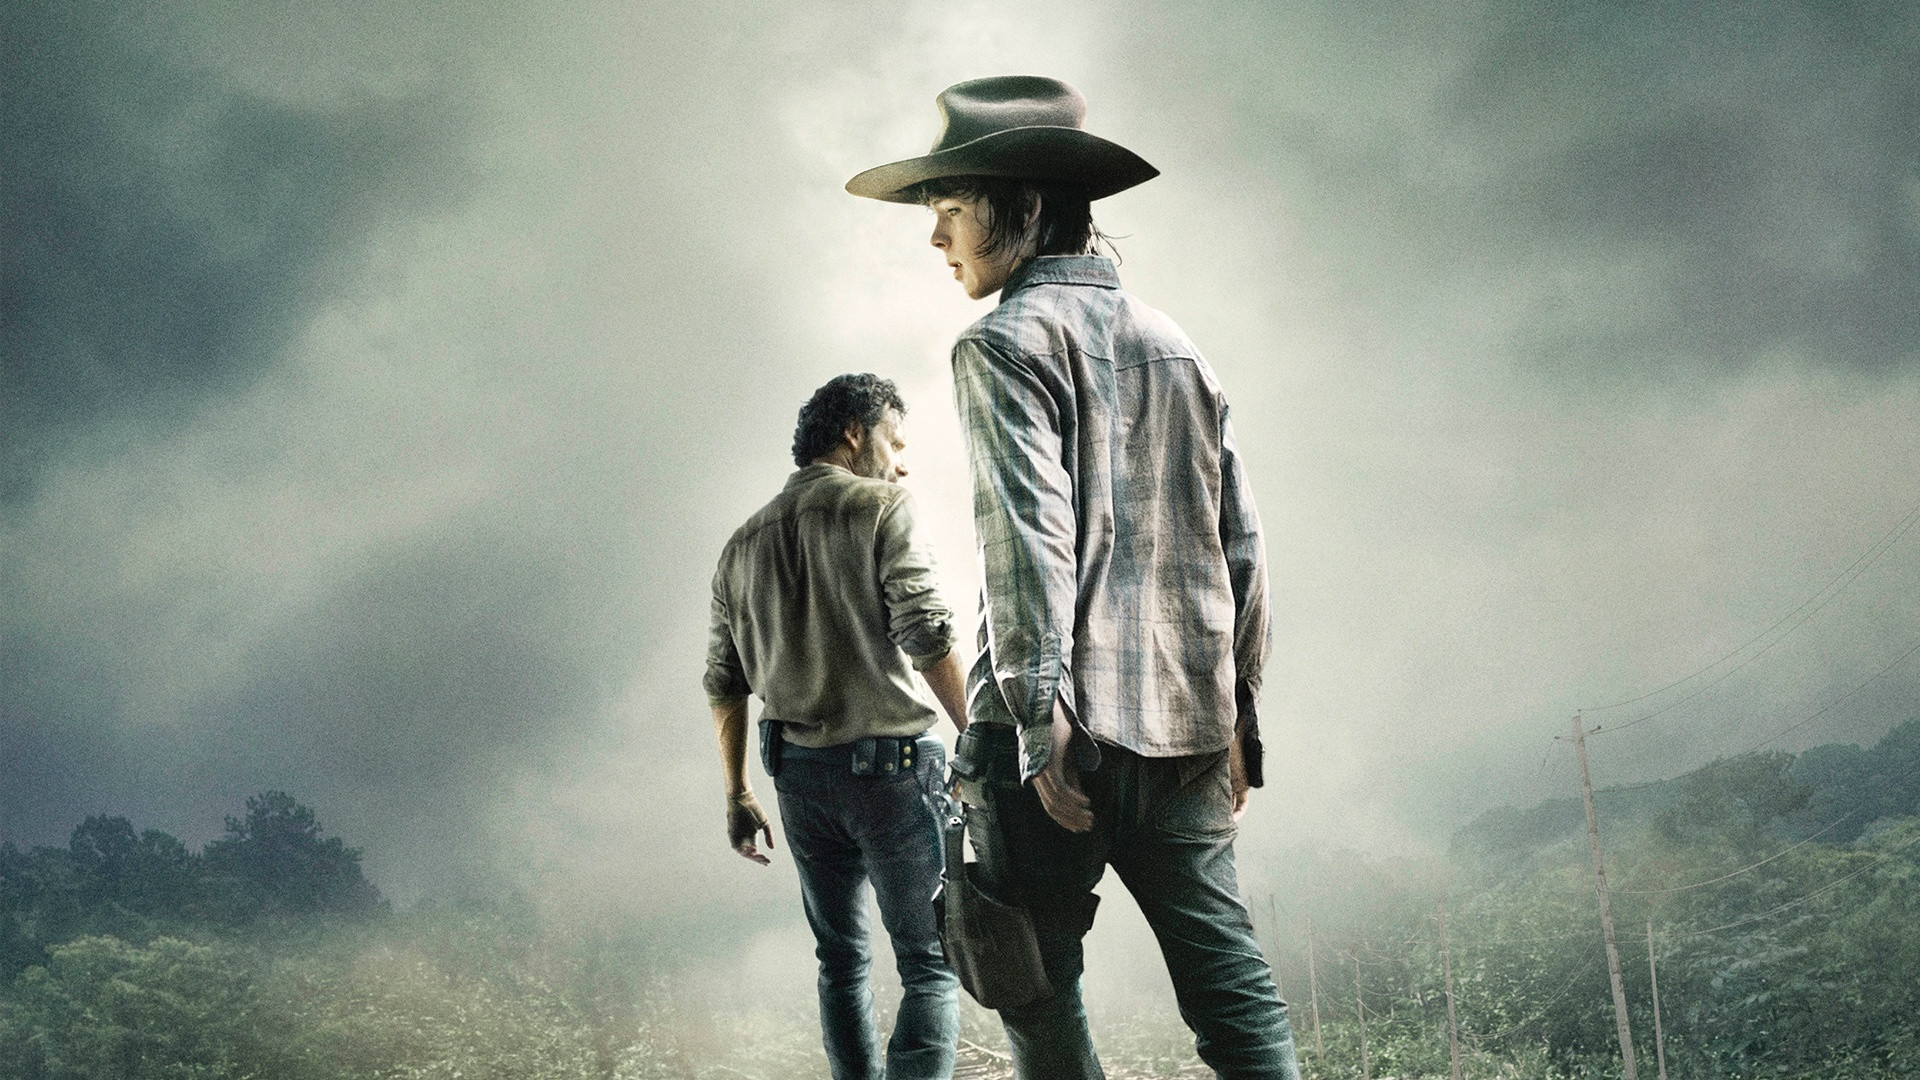 Walking Dead Season 5 Wallpaper For Android #H4OvD www